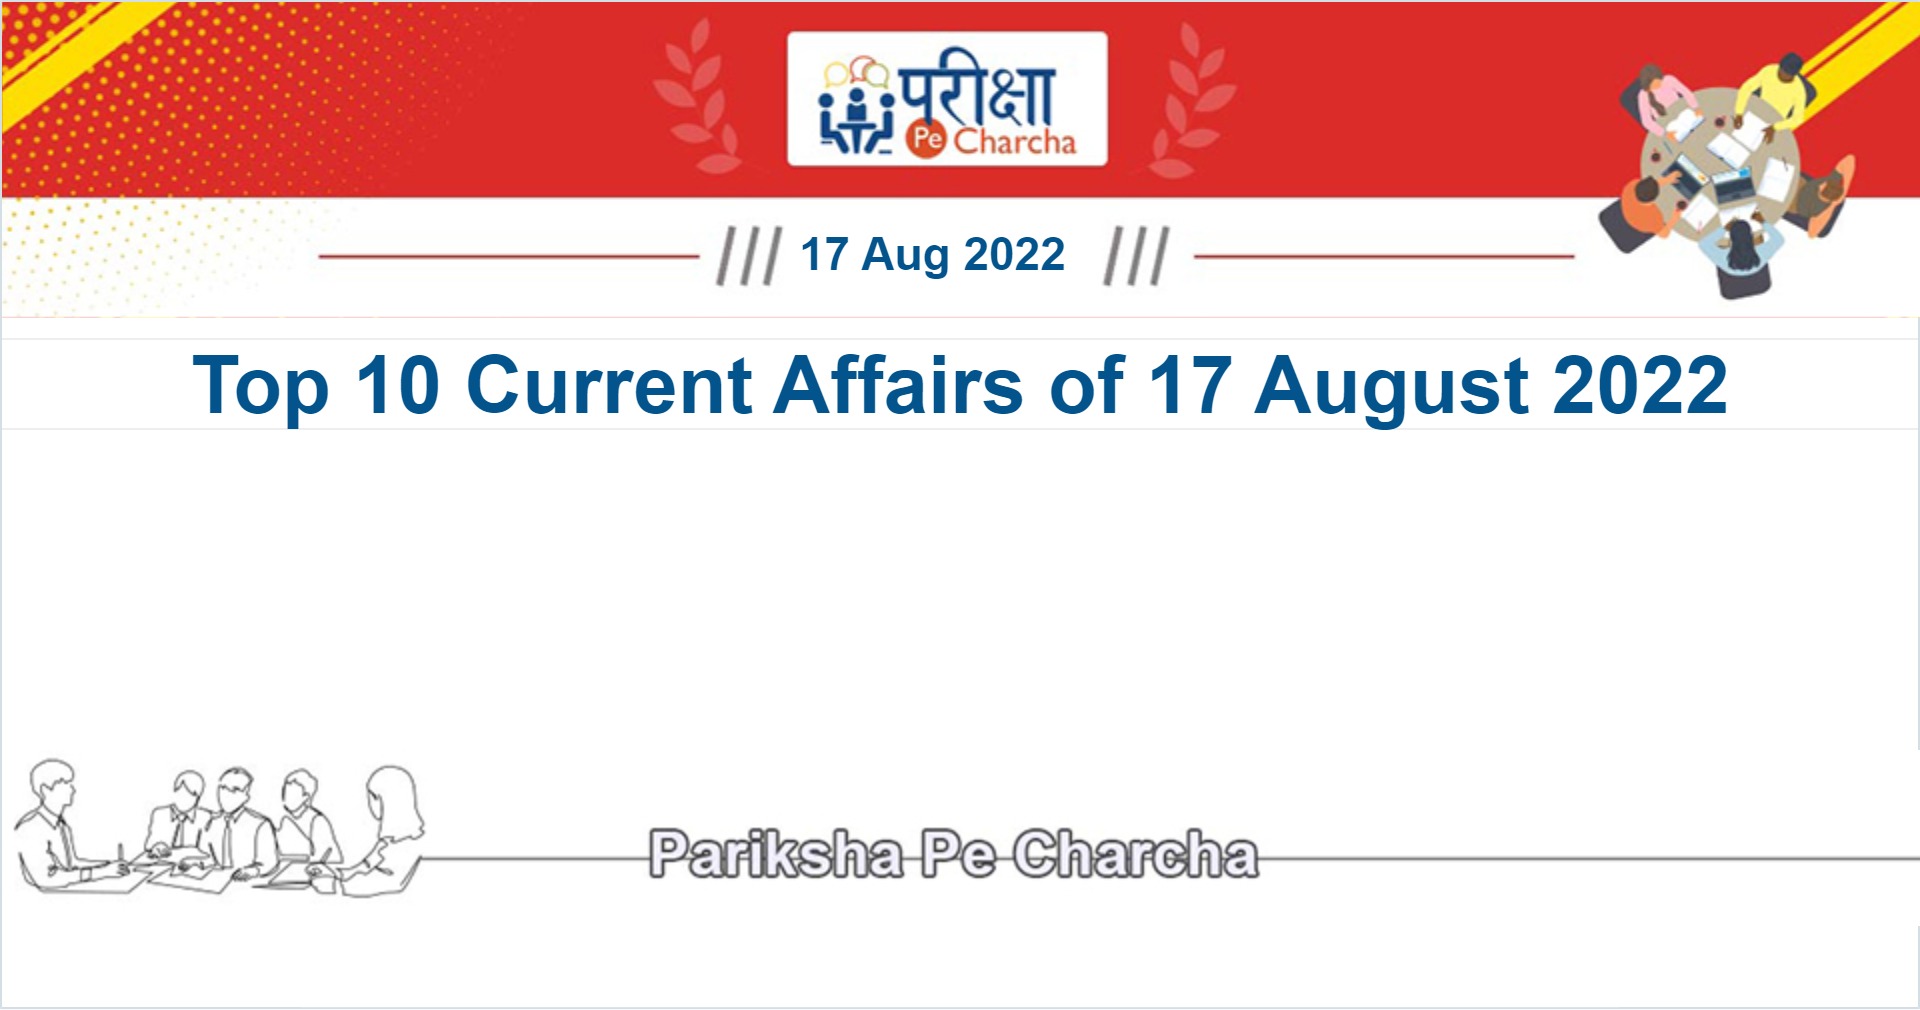 Current Affairs of 17 August 2022 in English and Hindi